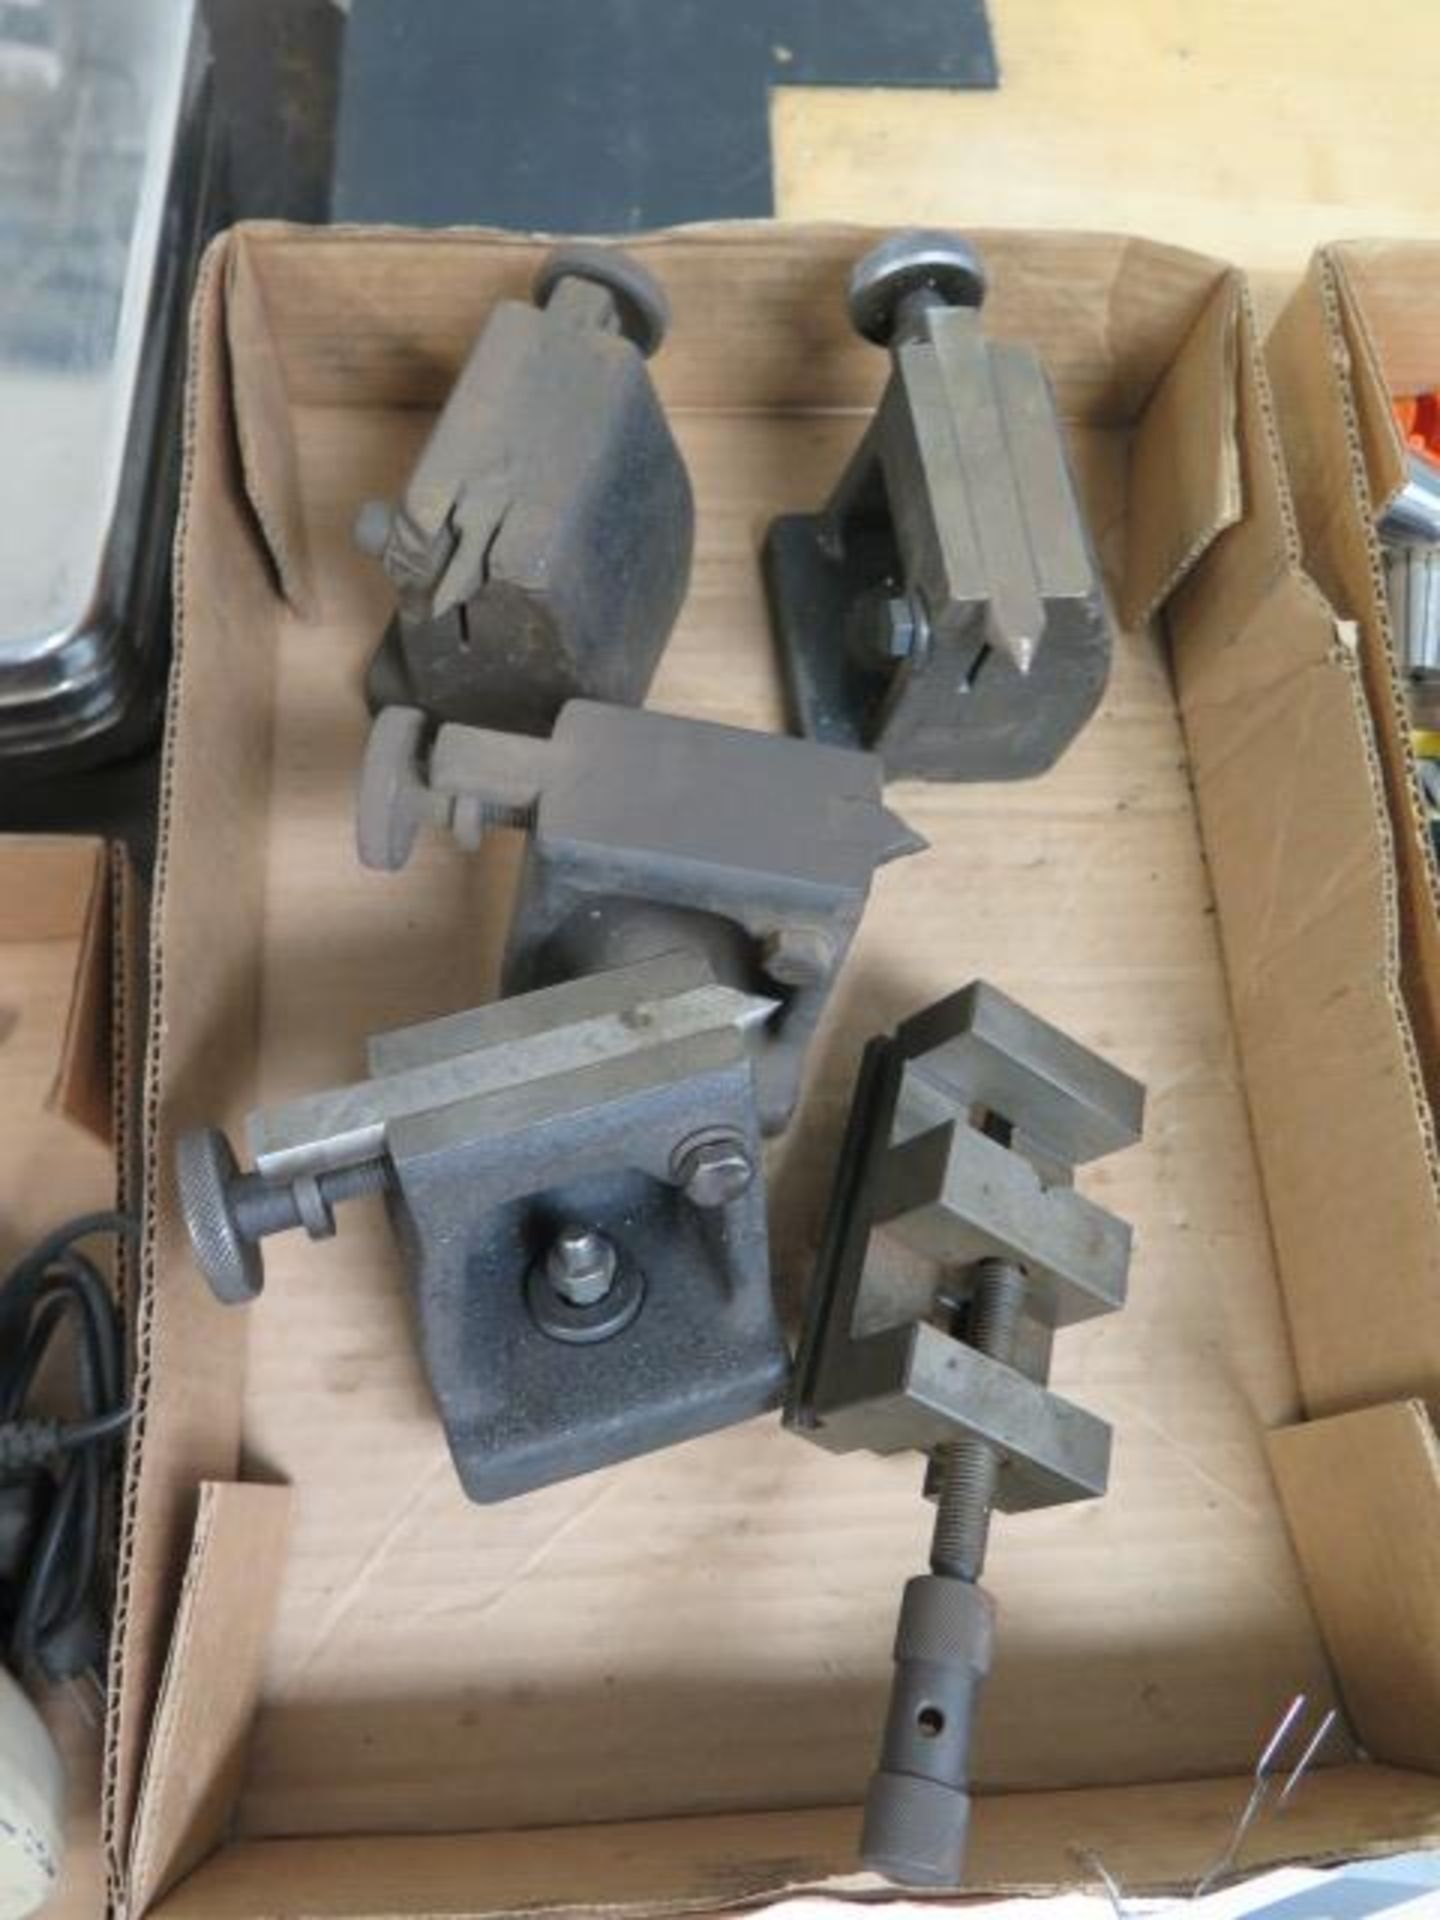 Mill Centers (4) and 2 3/8" Machine Vise (SOLD AS-IS - NO WARRANTY) - Image 2 of 4